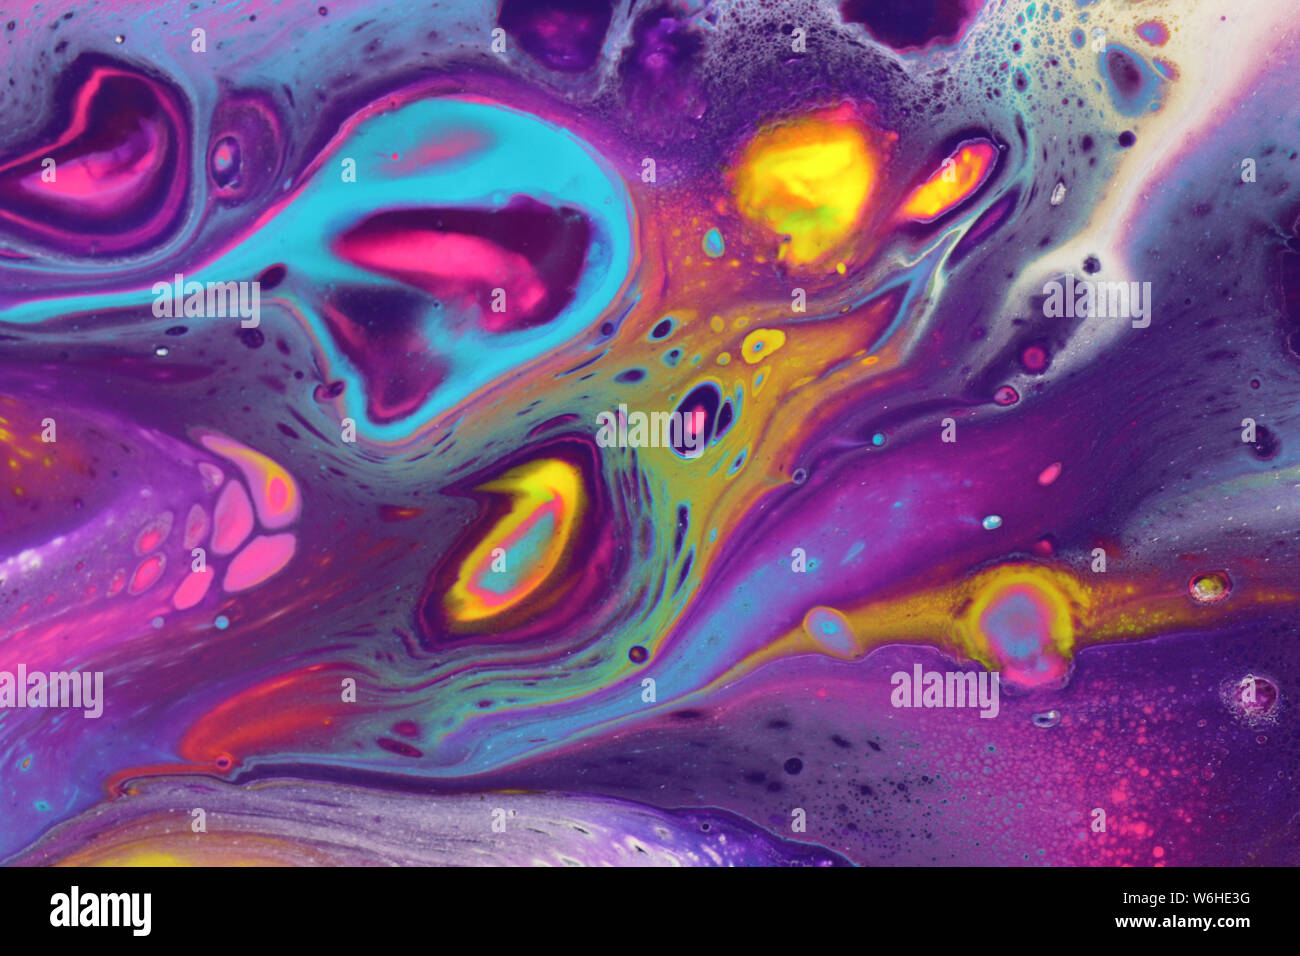 Vivid neon colors create a cosmic feel to these acrylic pour paintings perfect for colorful backgrounds. Stock Photo